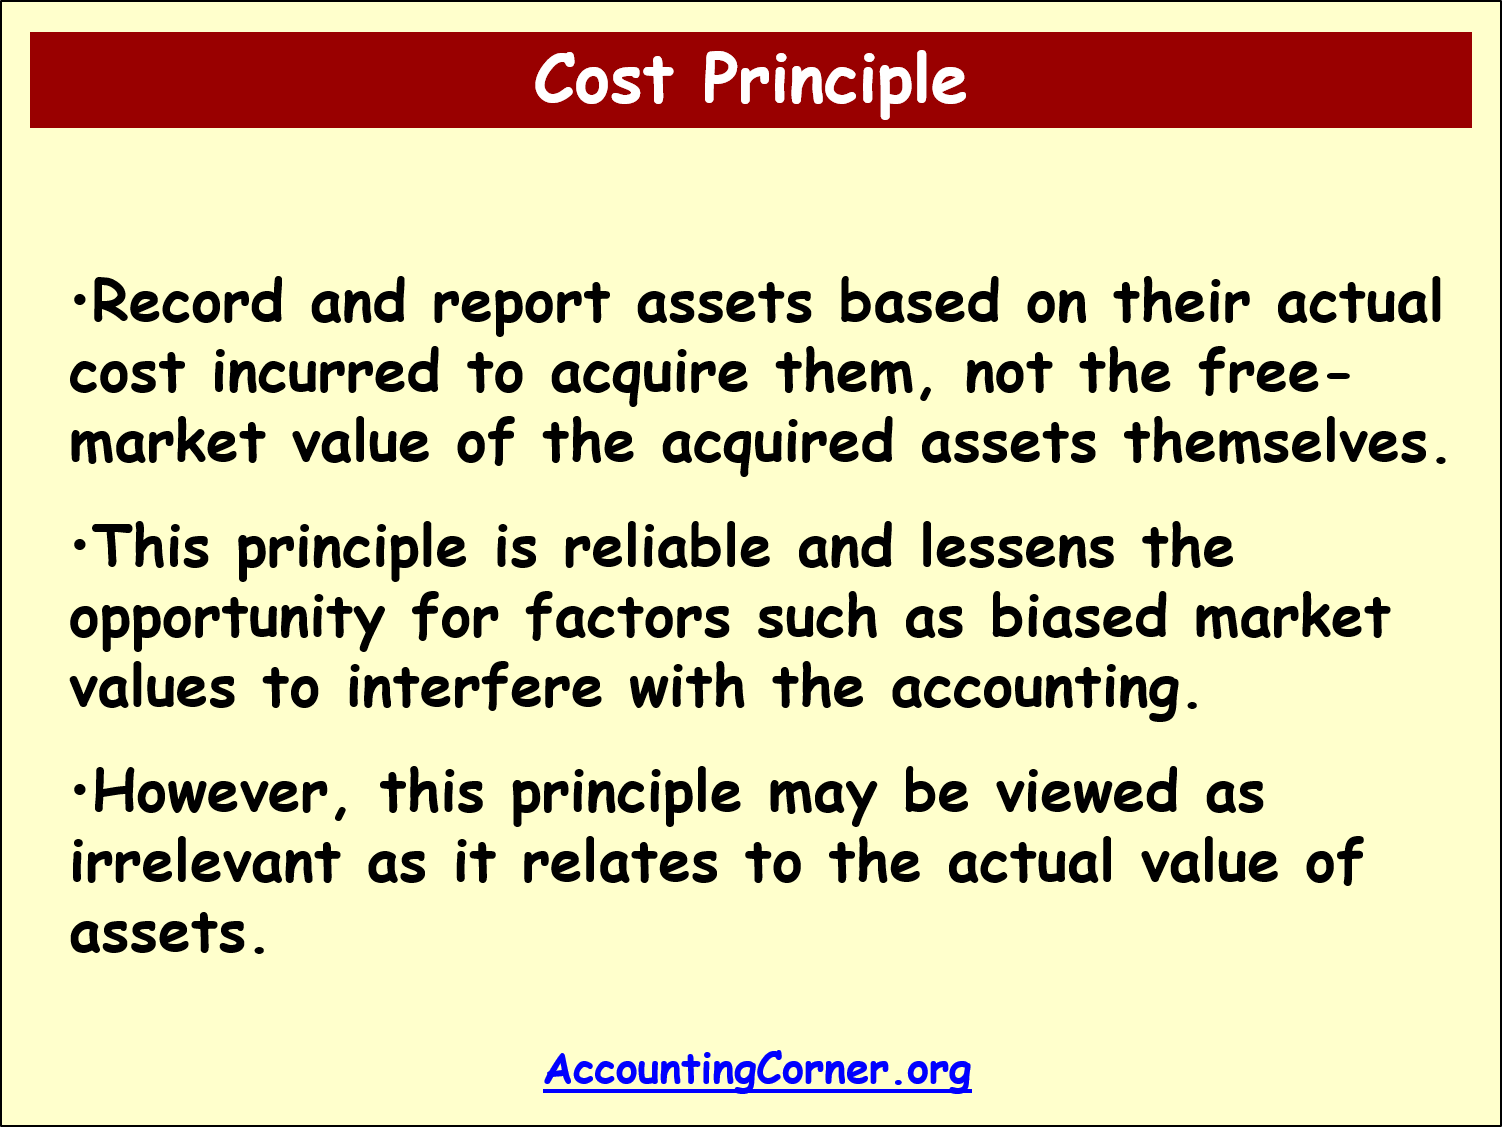 cost assignment in accounting meaning